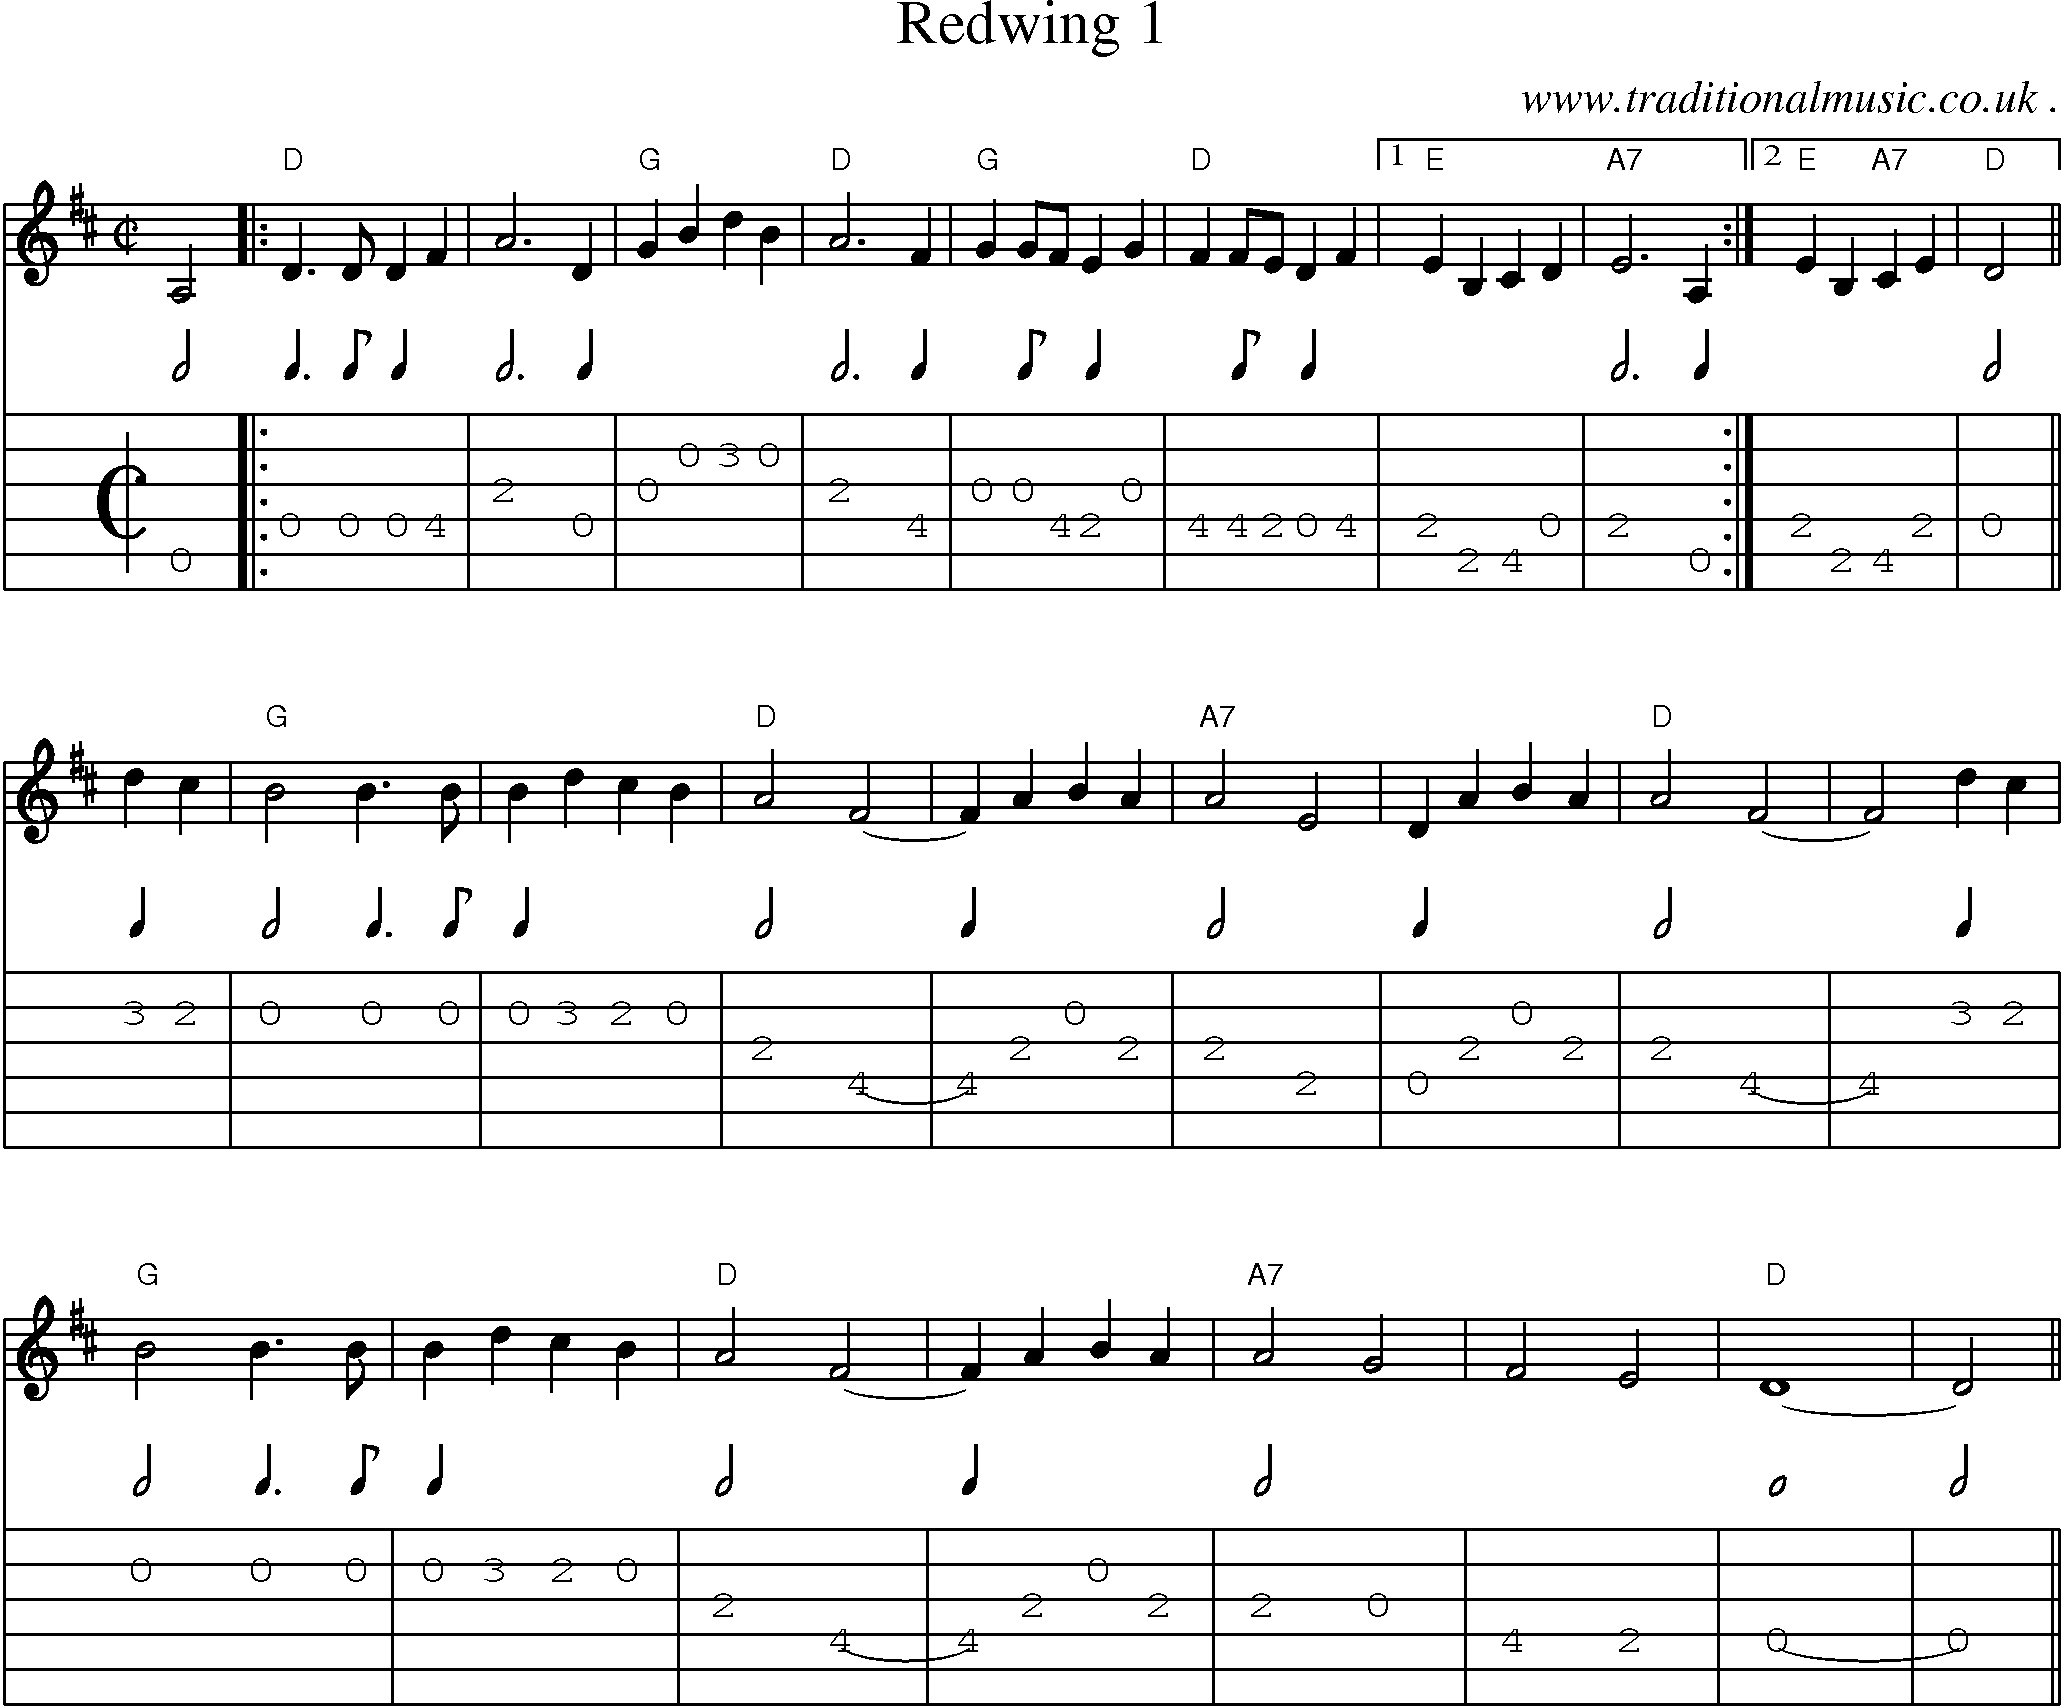 Music Score and Guitar Tabs for Redwing 1